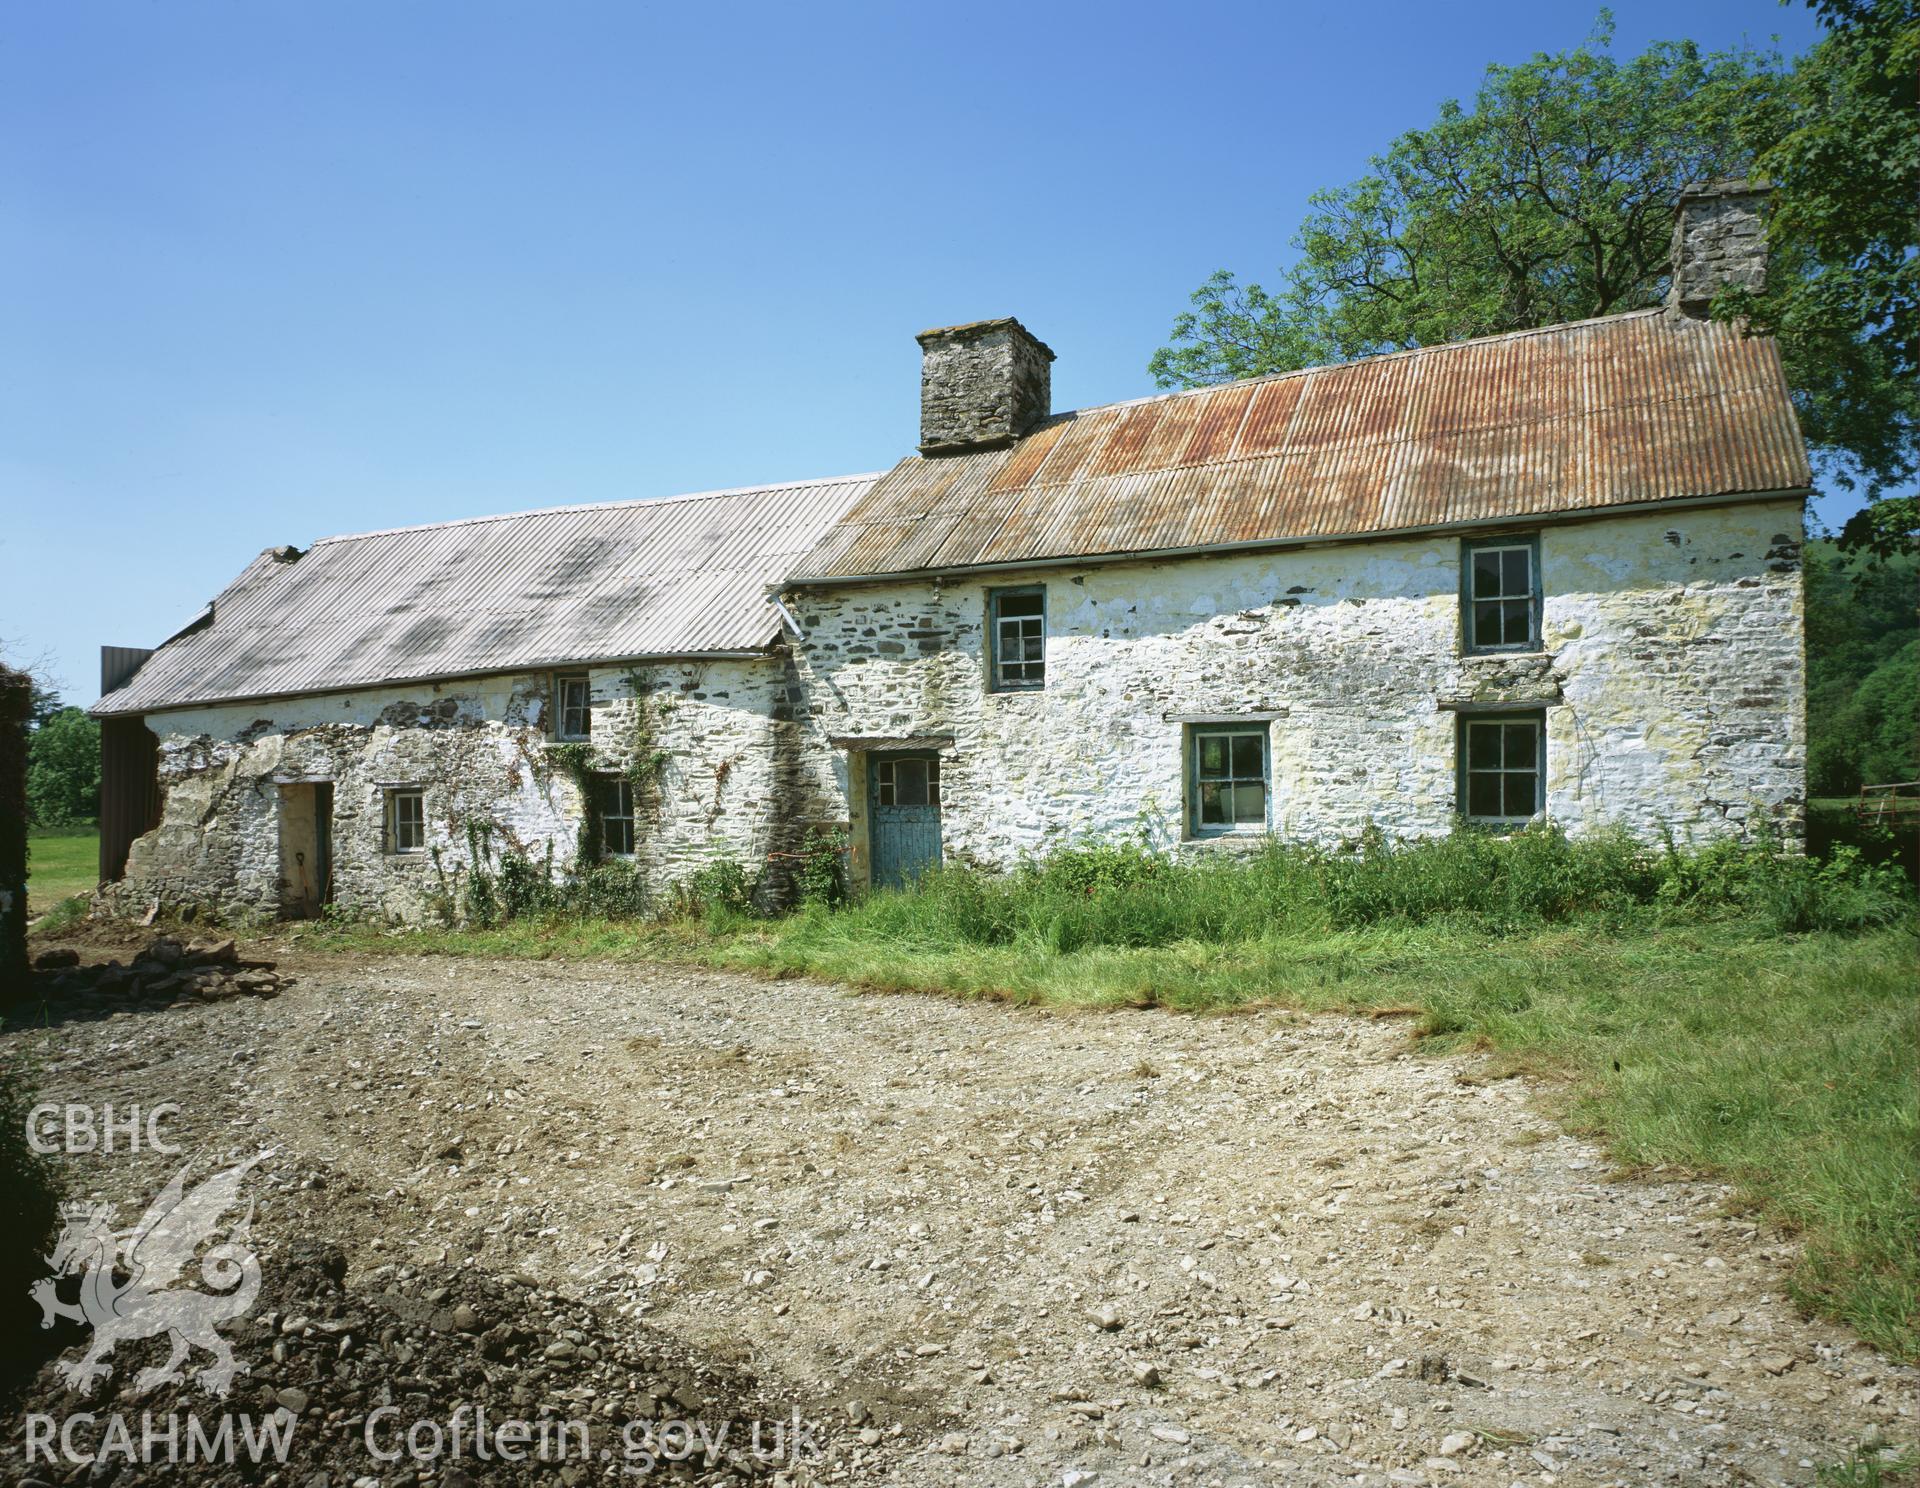 RCAHMW colour transparency showing main elevation view of Gwastod, Nantcwnlle, taken by Iain Wright, June 2005